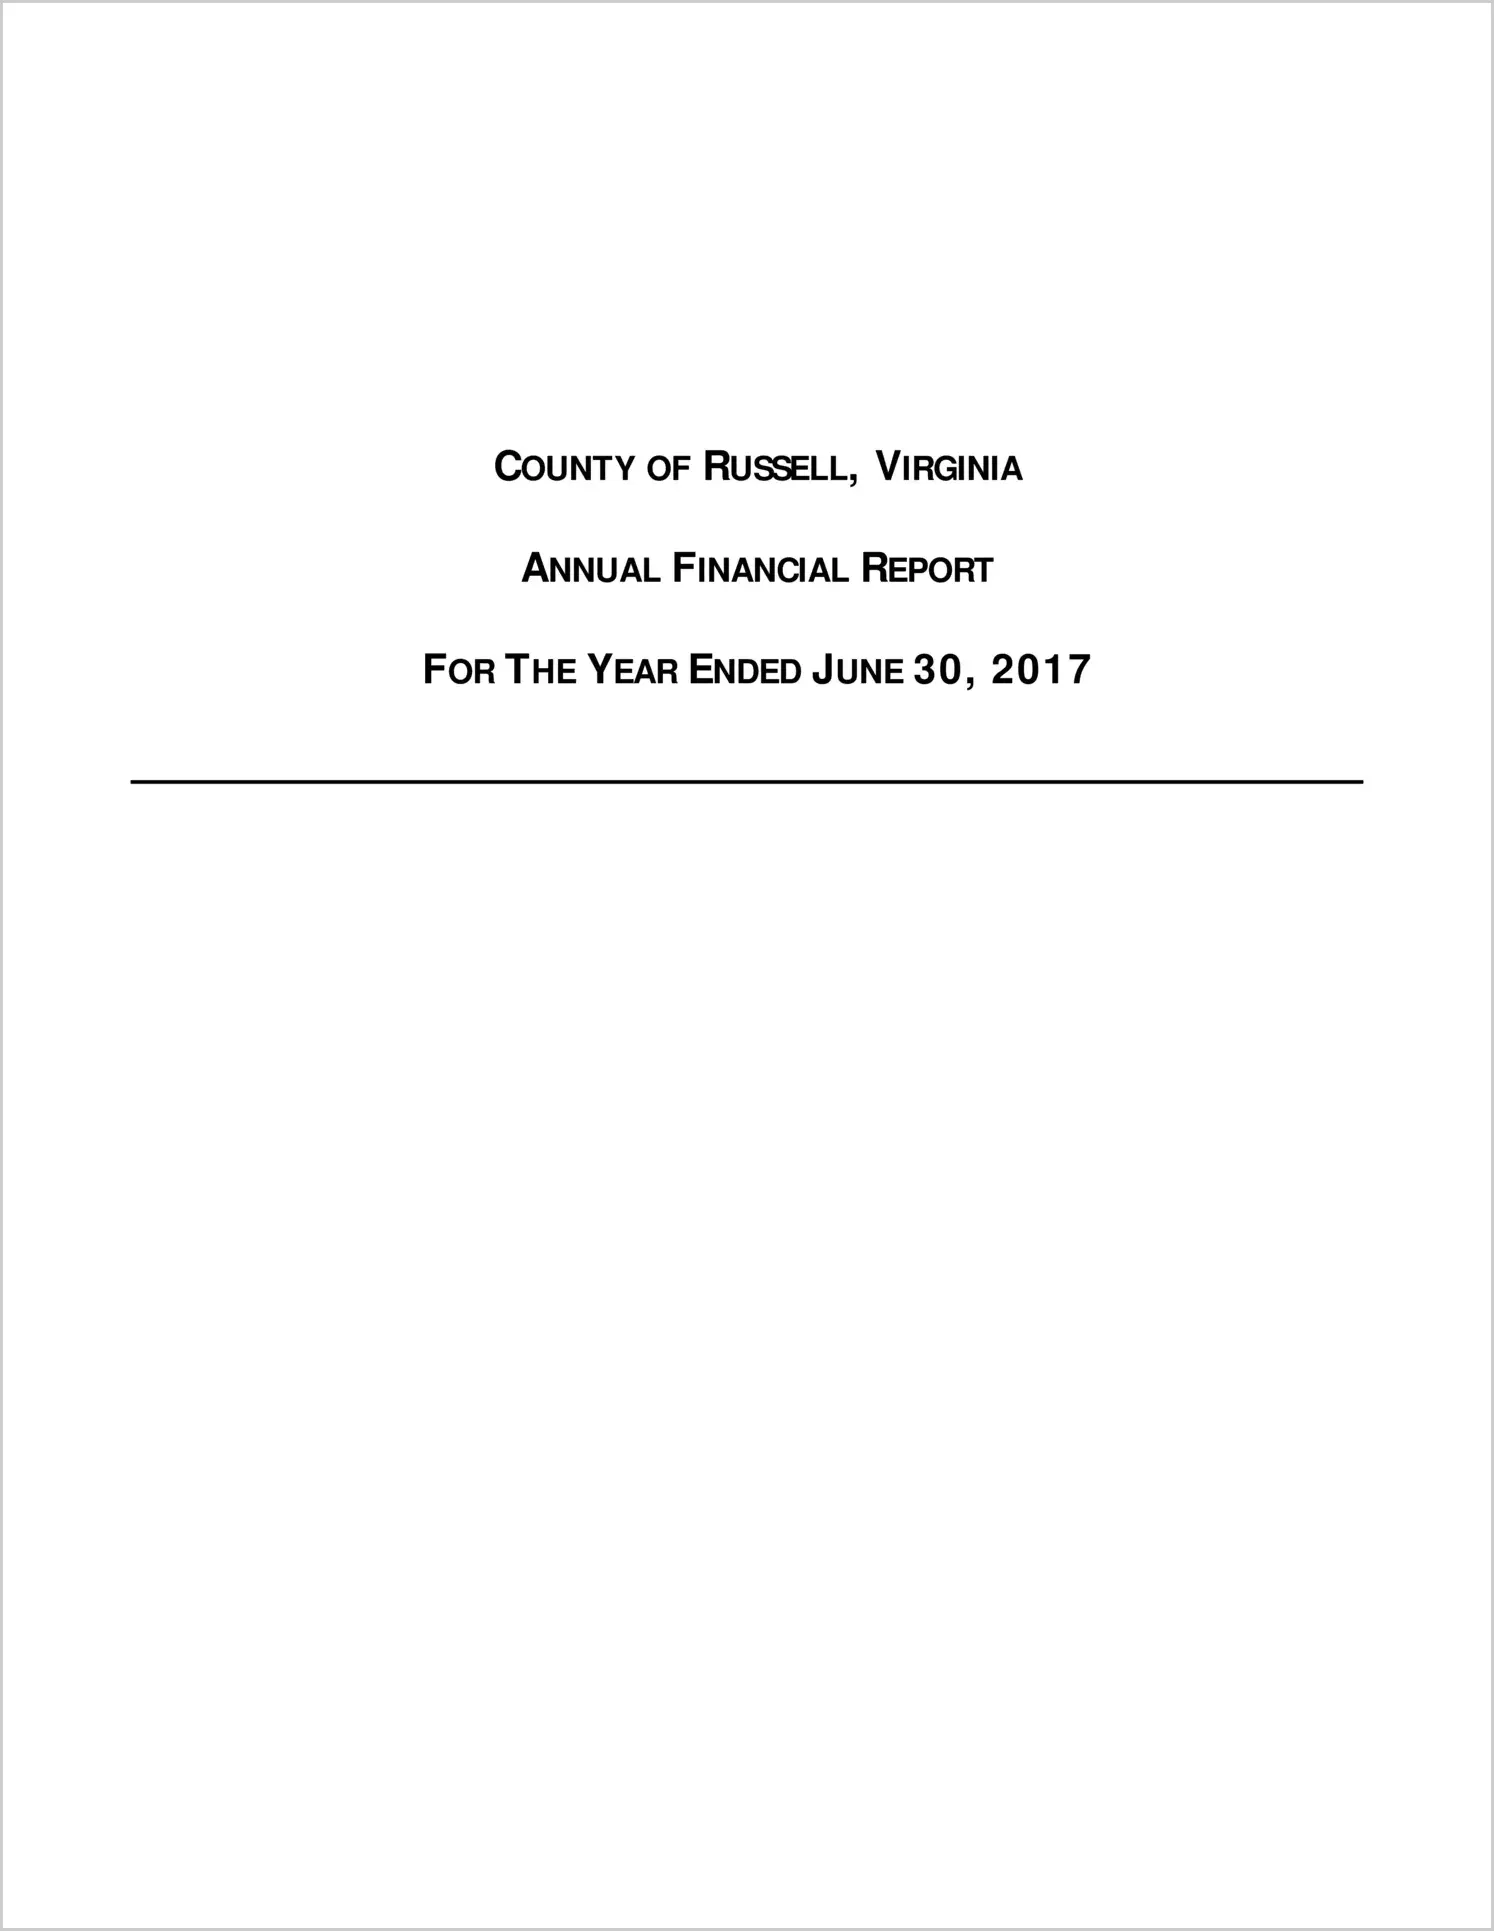 2017 Annual Financial Report for County of Russell